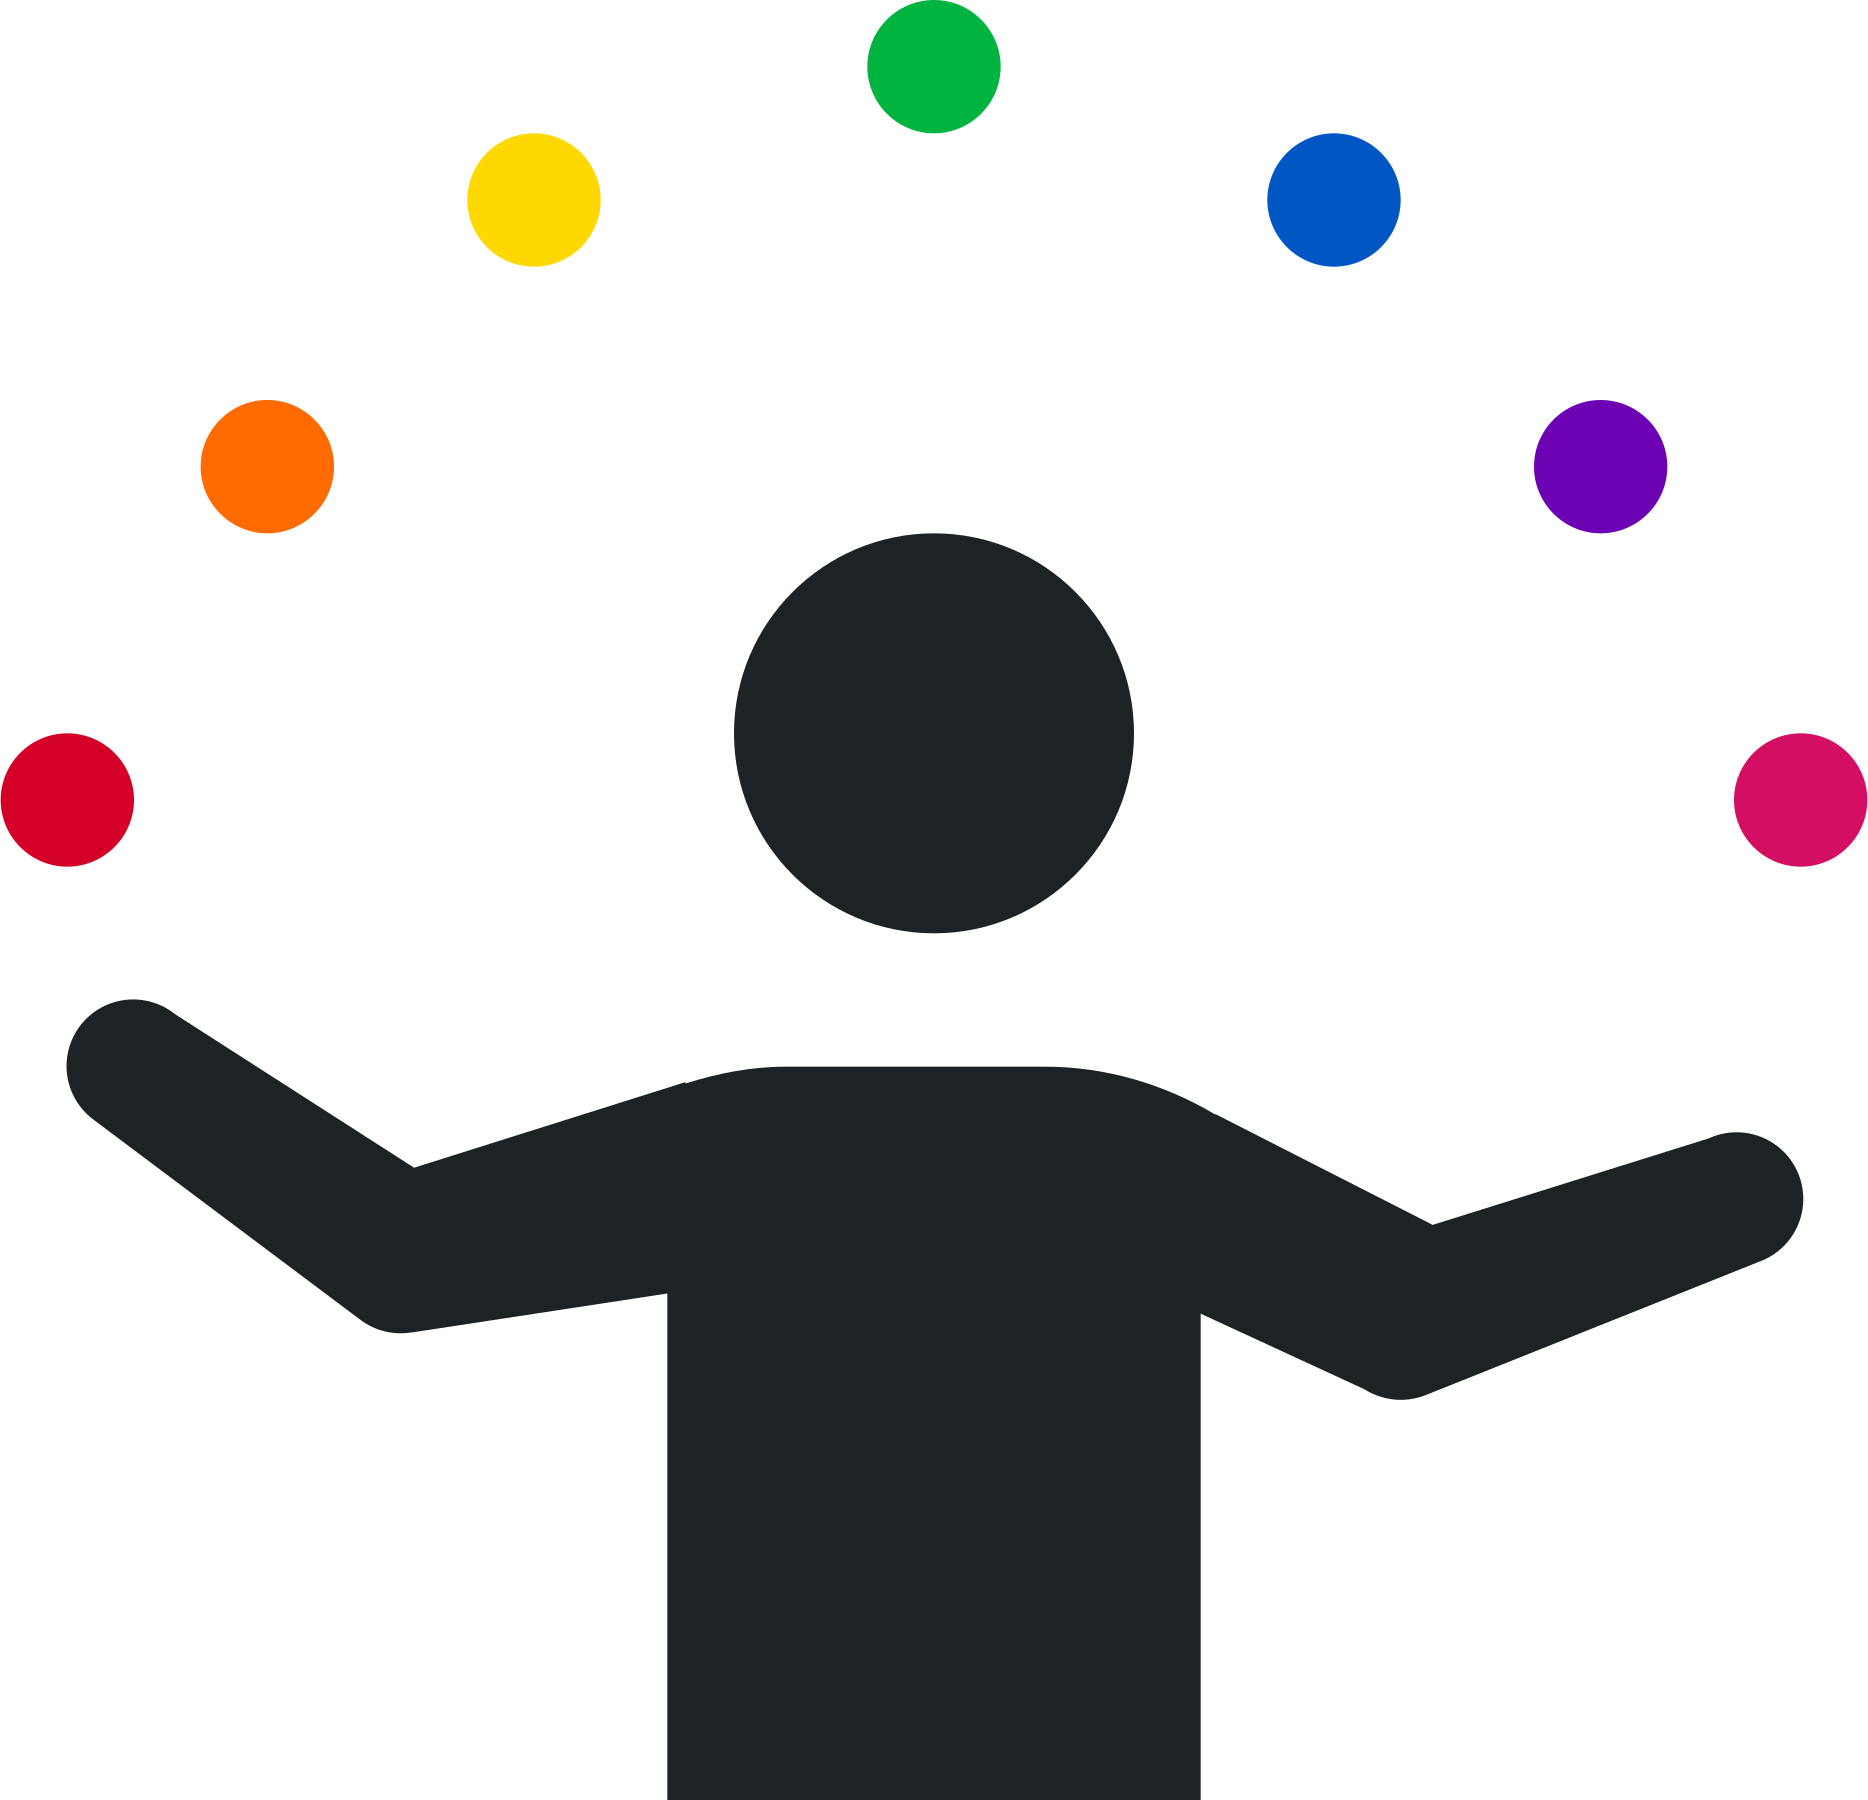 An icon of a person, juggling 7 rainbow-colored balls